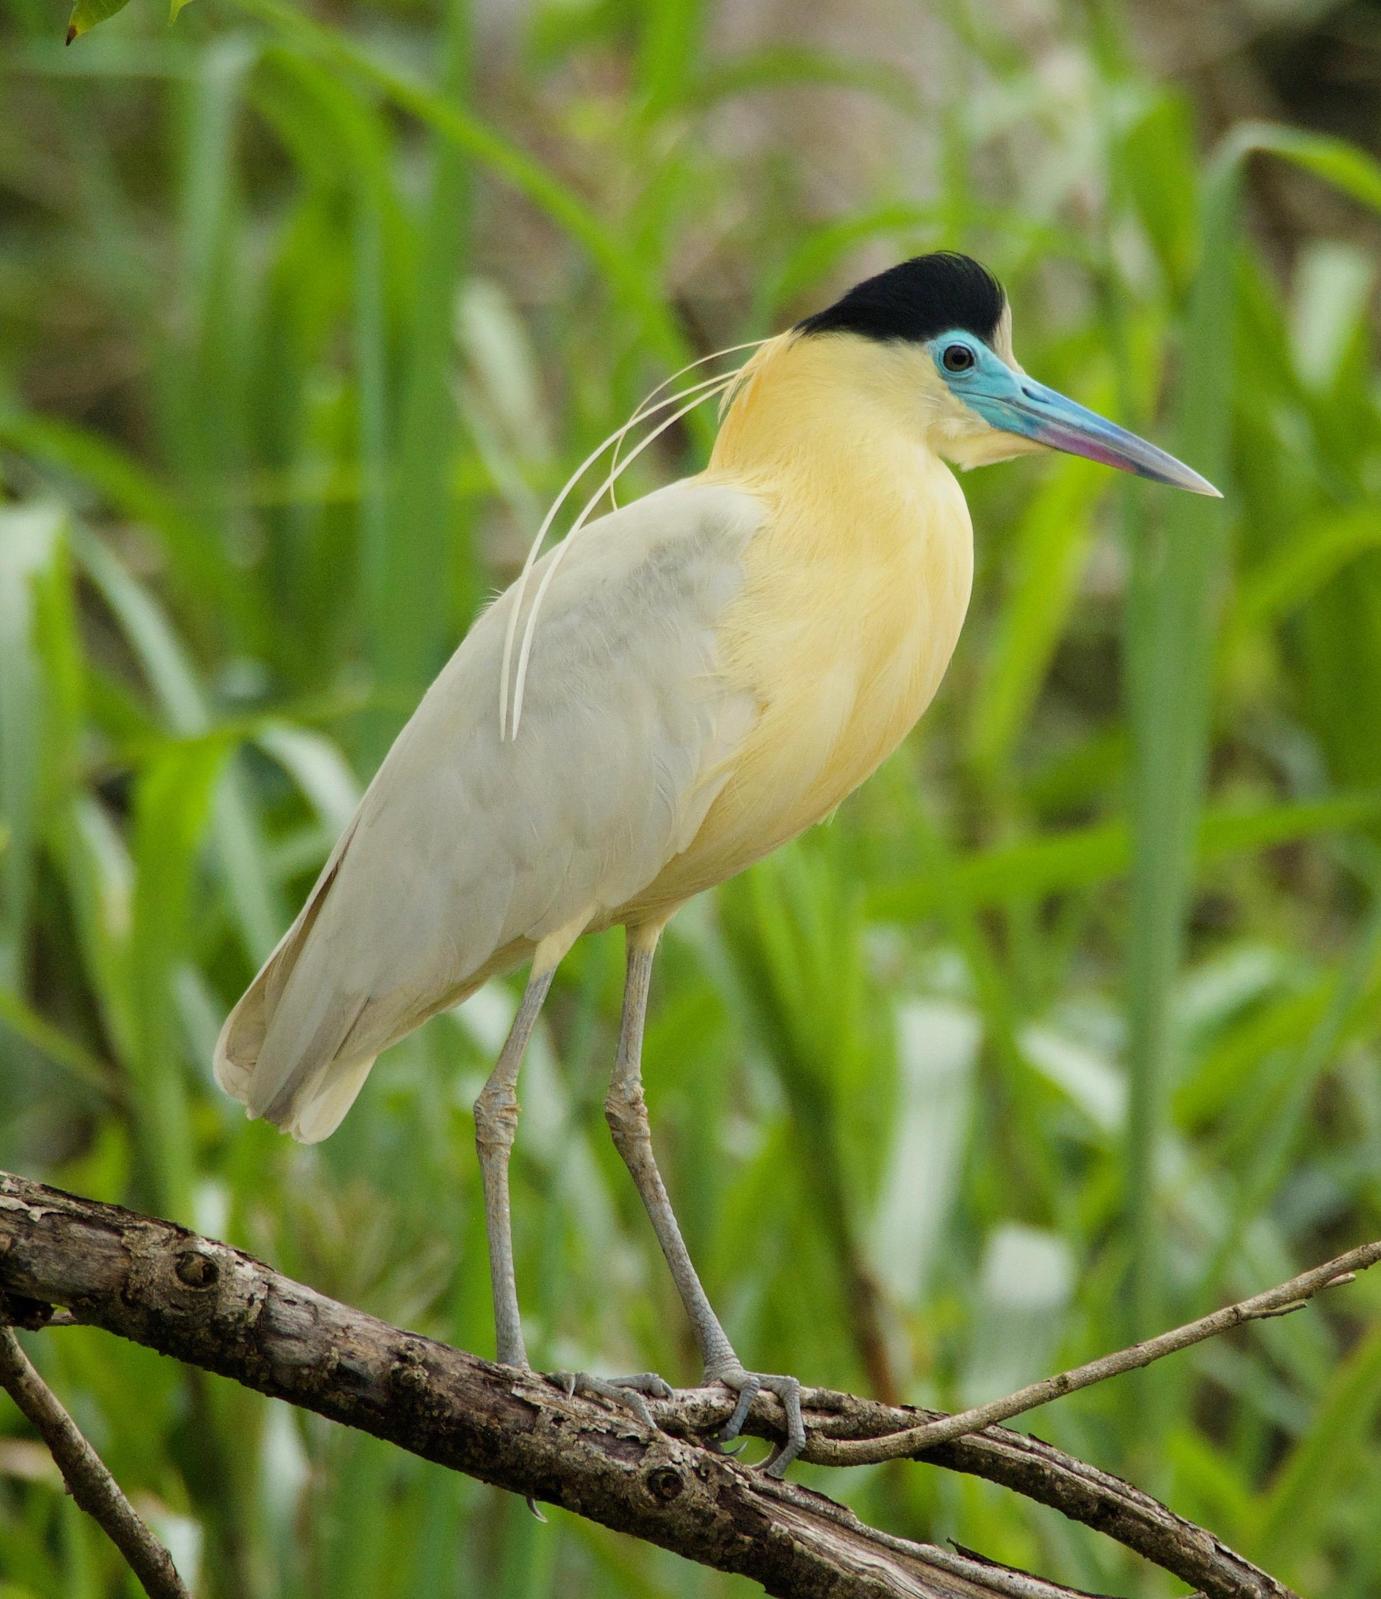 Capped Heron Photo by Susan Leverton